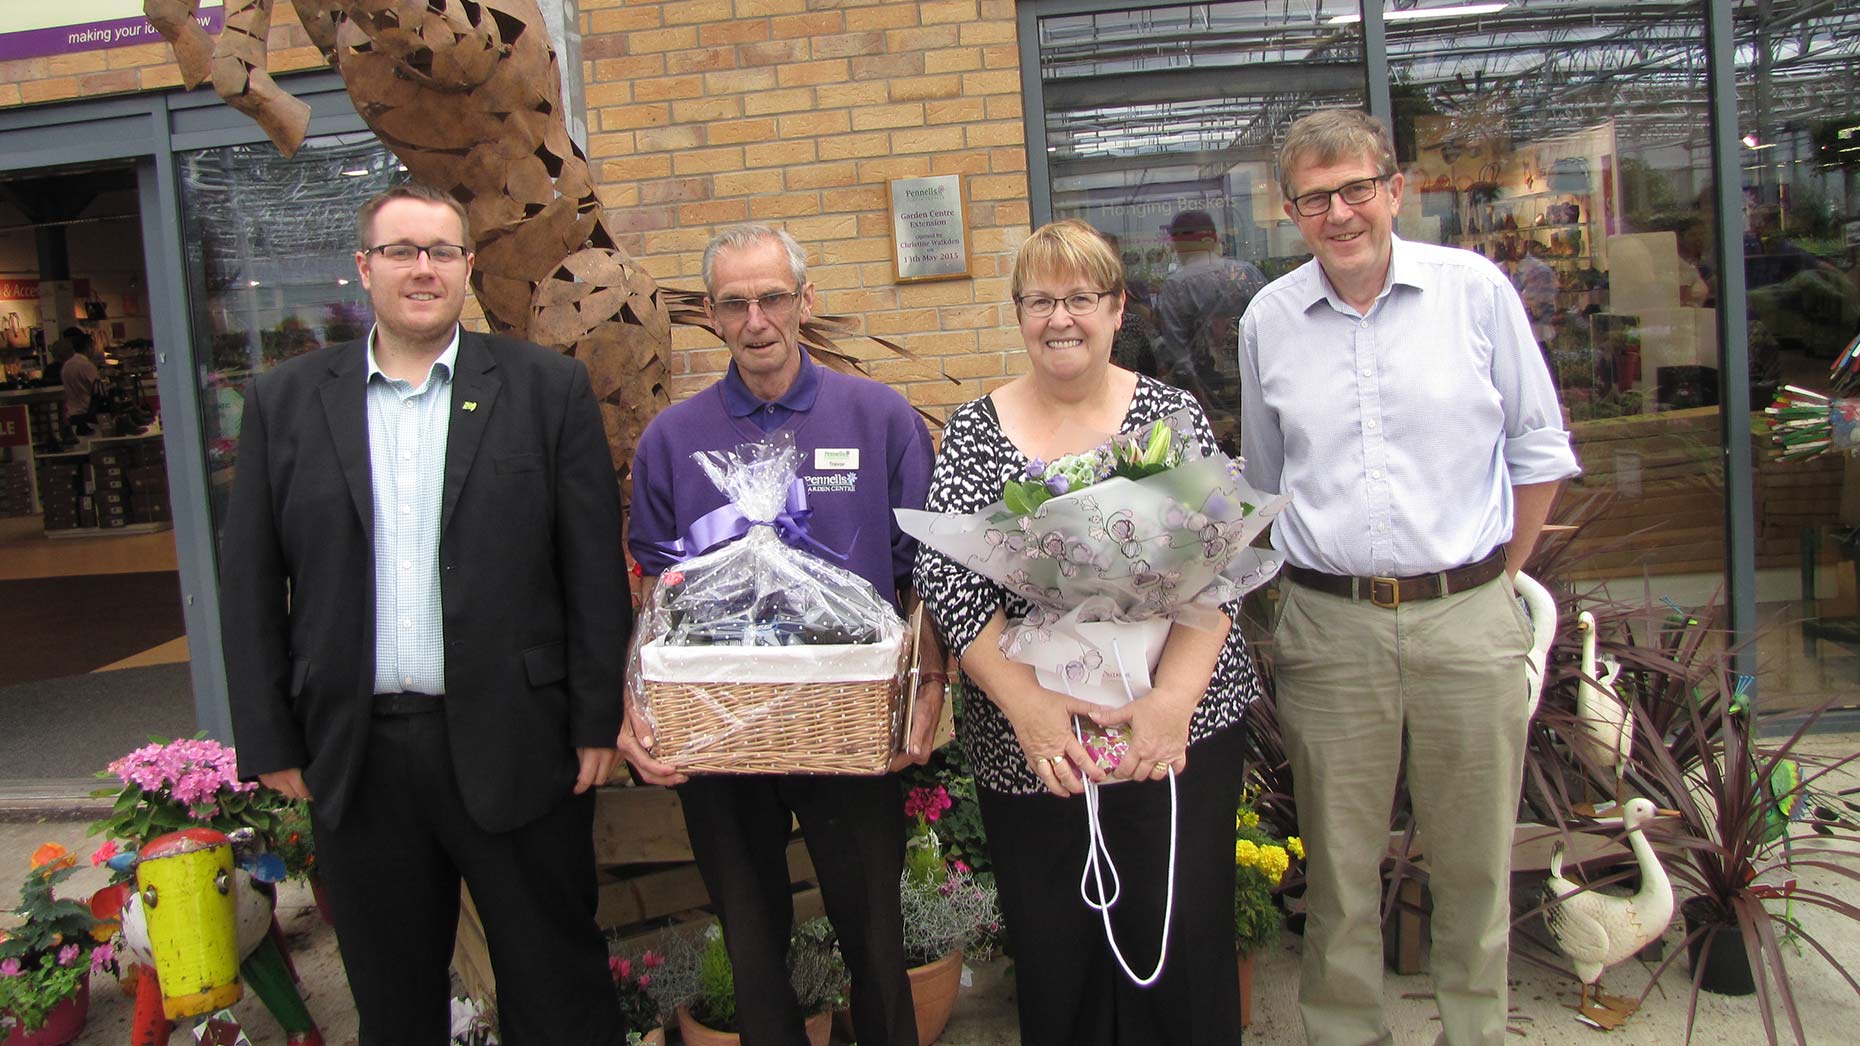 William Pennell, Managing Director, Trevor Smith and his wife and Richard Pennell, Chairman of Pennell's Garden Centre